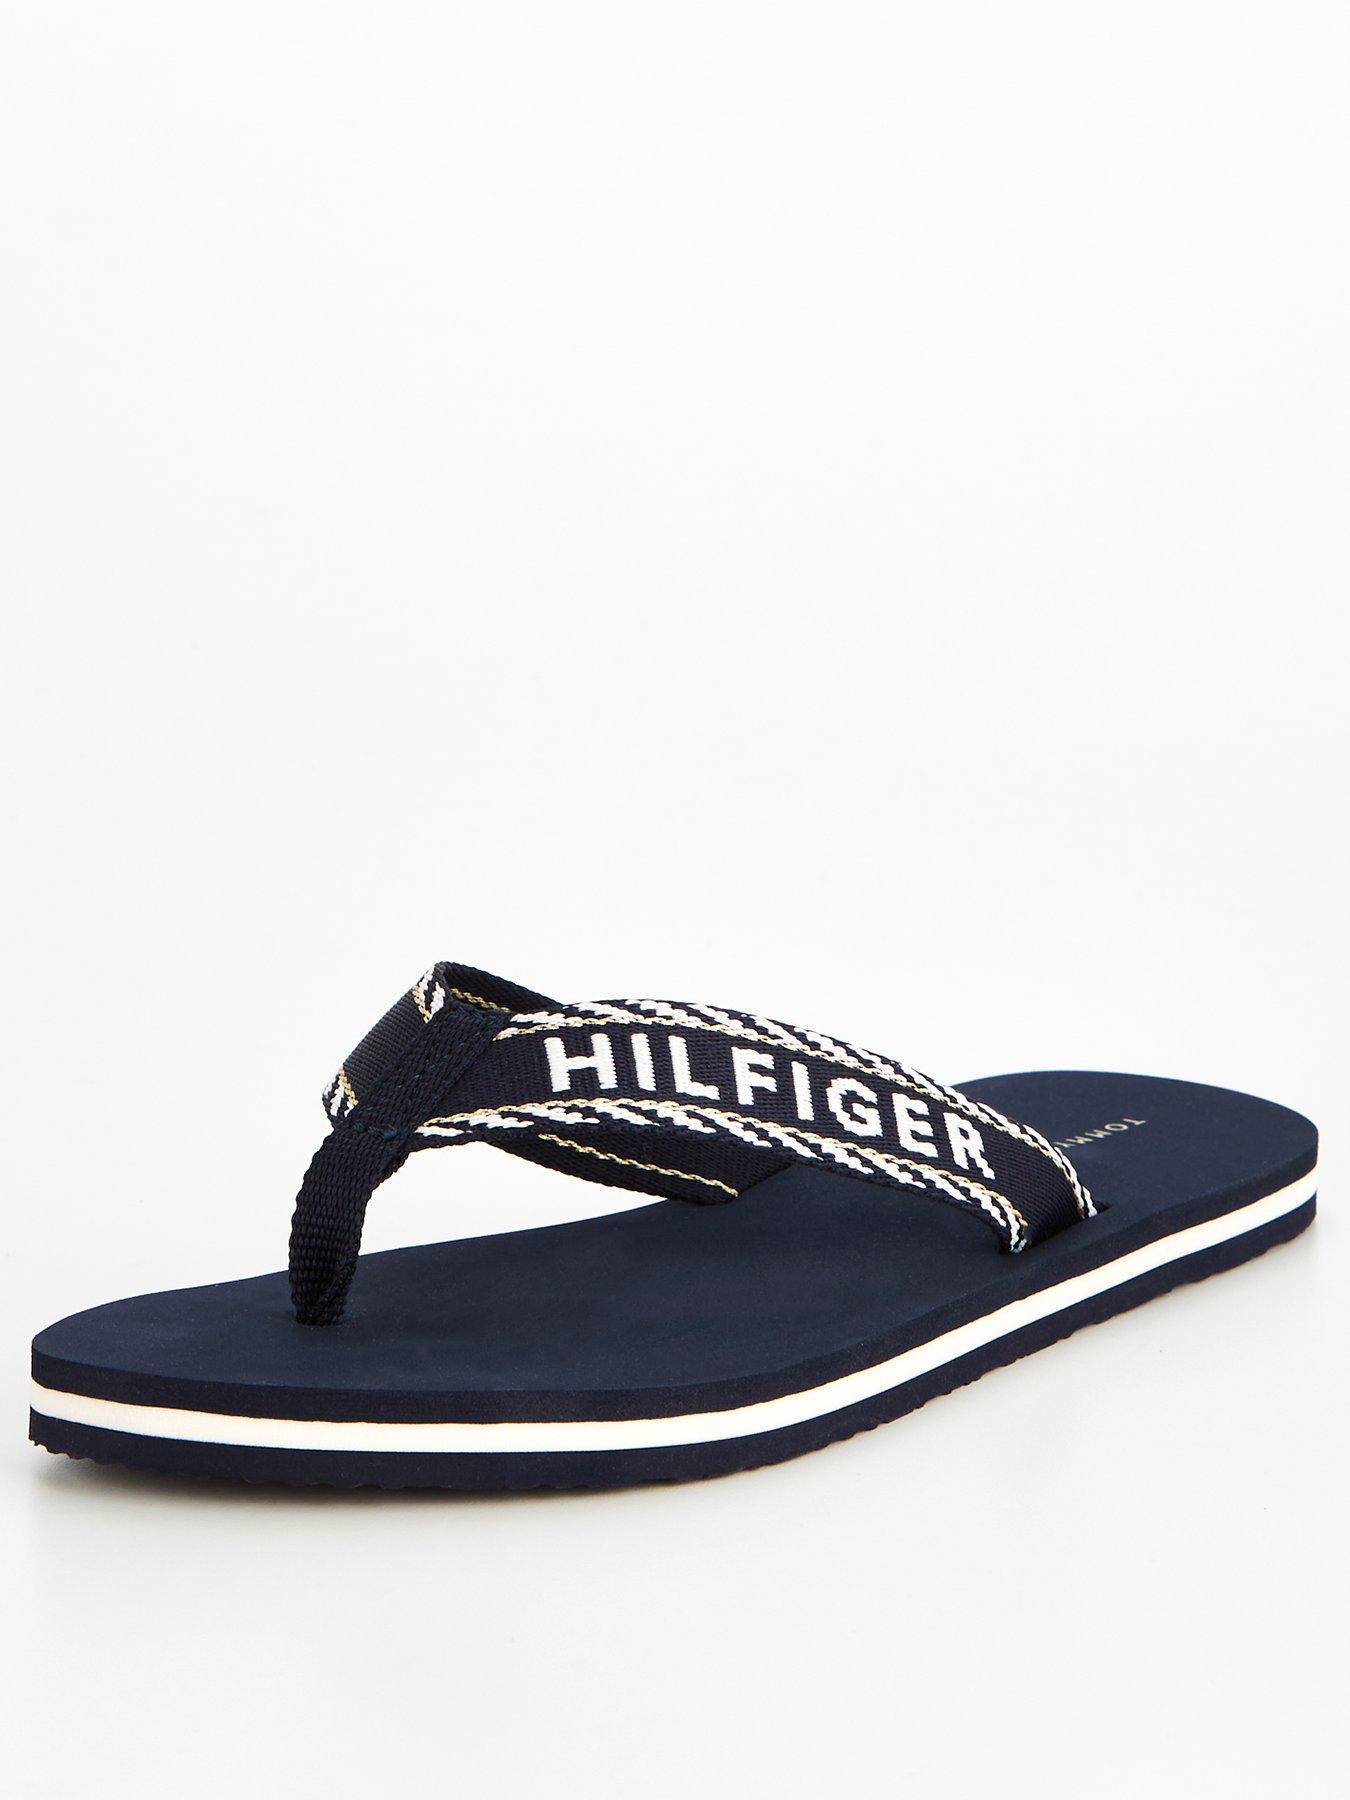 Blue | Tommy hilfiger | Shoes & boots | www.very.co.uk